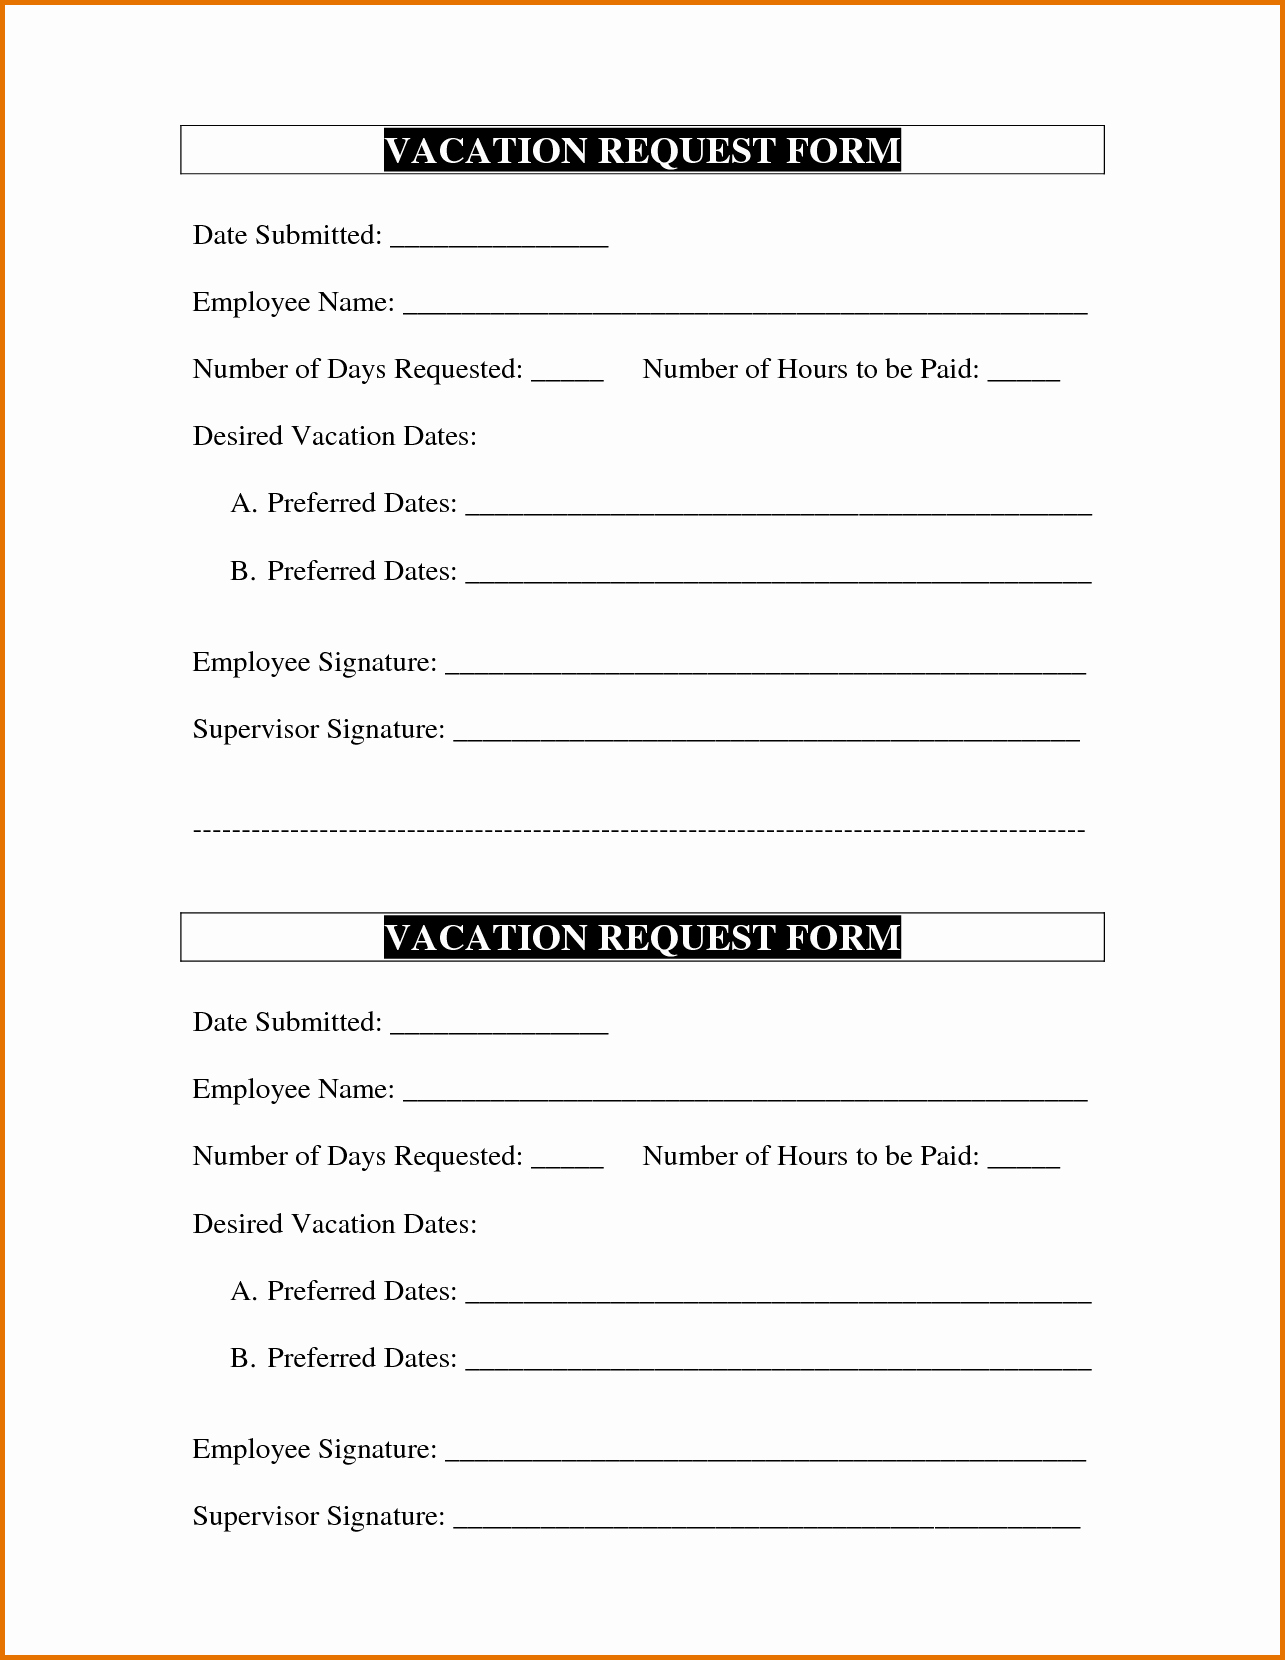 Vacation Request form Template Awesome Vacation Request form Template – Teplates for Every Day